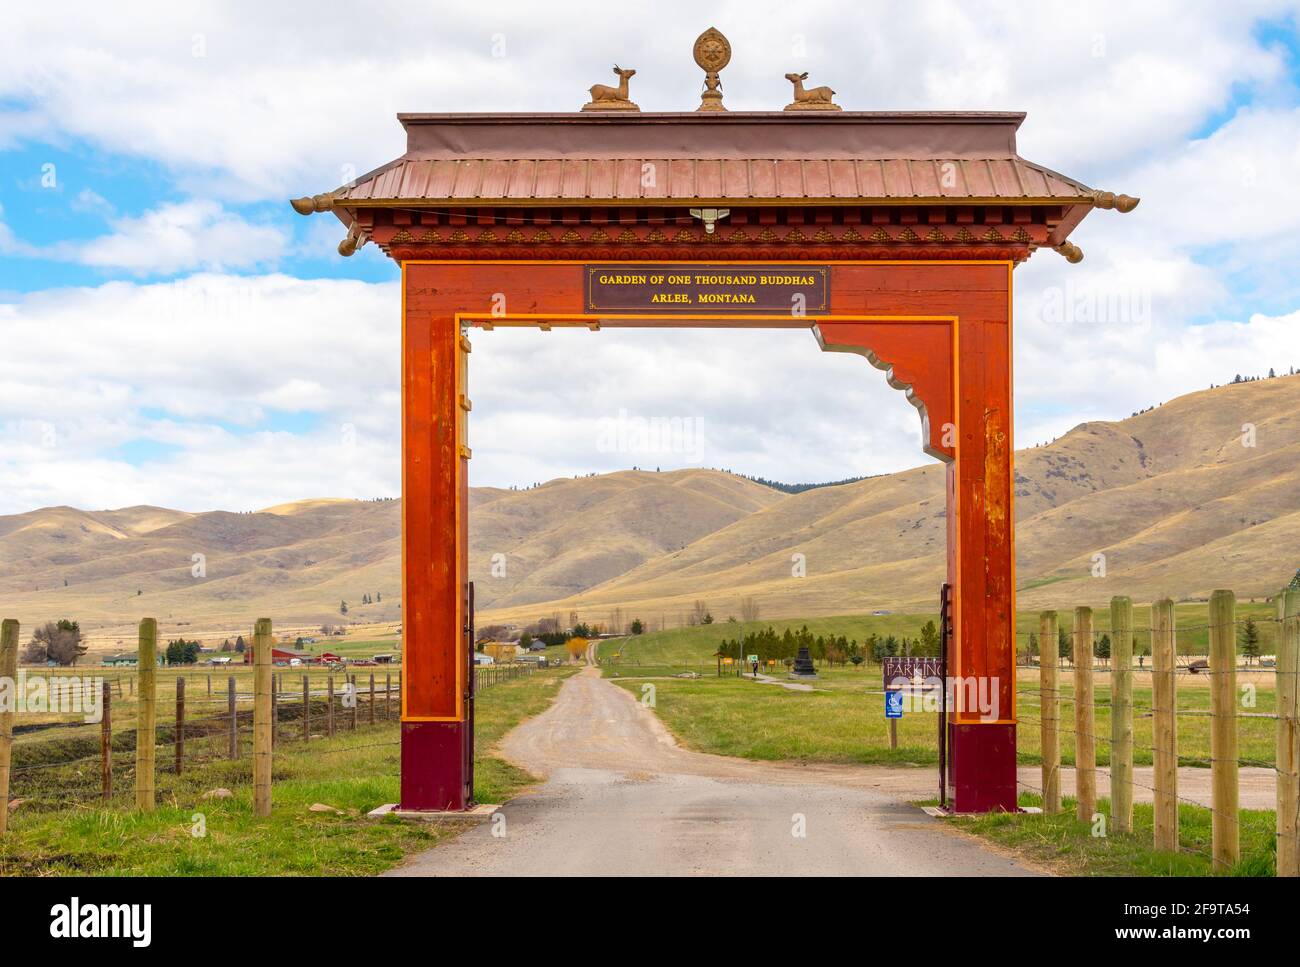 The Asian influenced entrance and sign to the temple Garden of One Thousand Buddhas in the rural countryside of Arlee, Montana, USA. Stock Photo